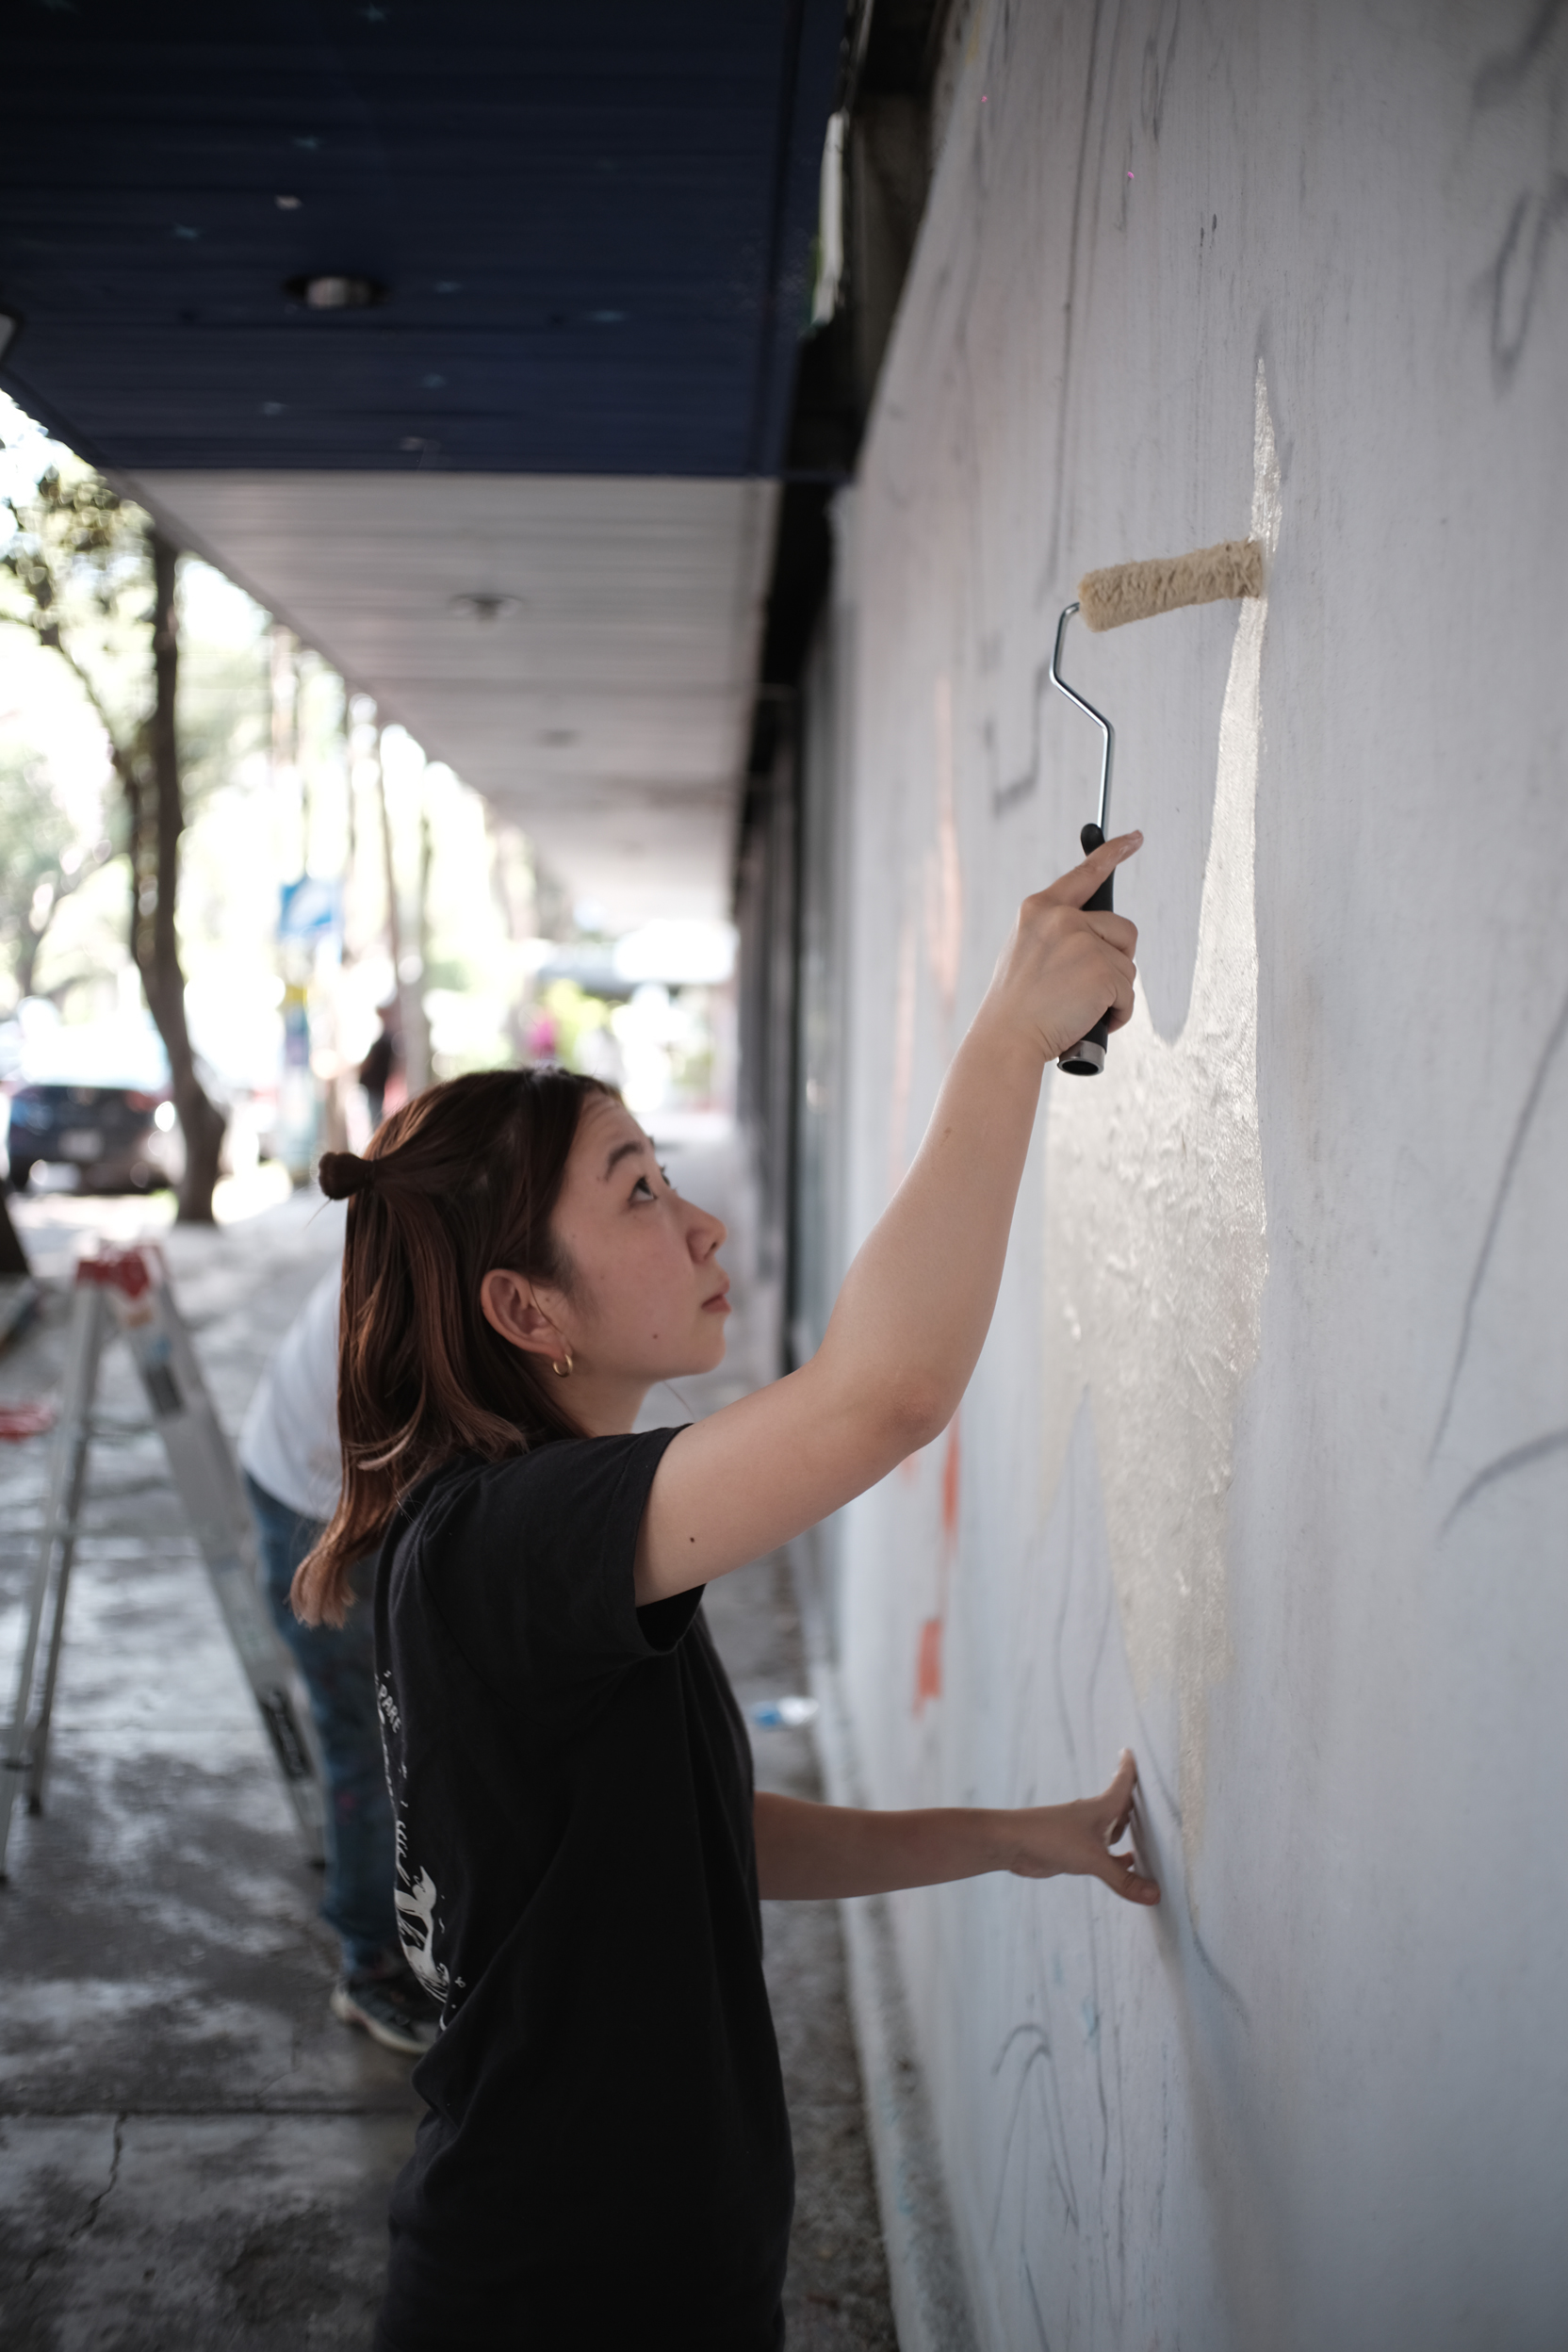 Artist working on the mural, Mexico City 2023